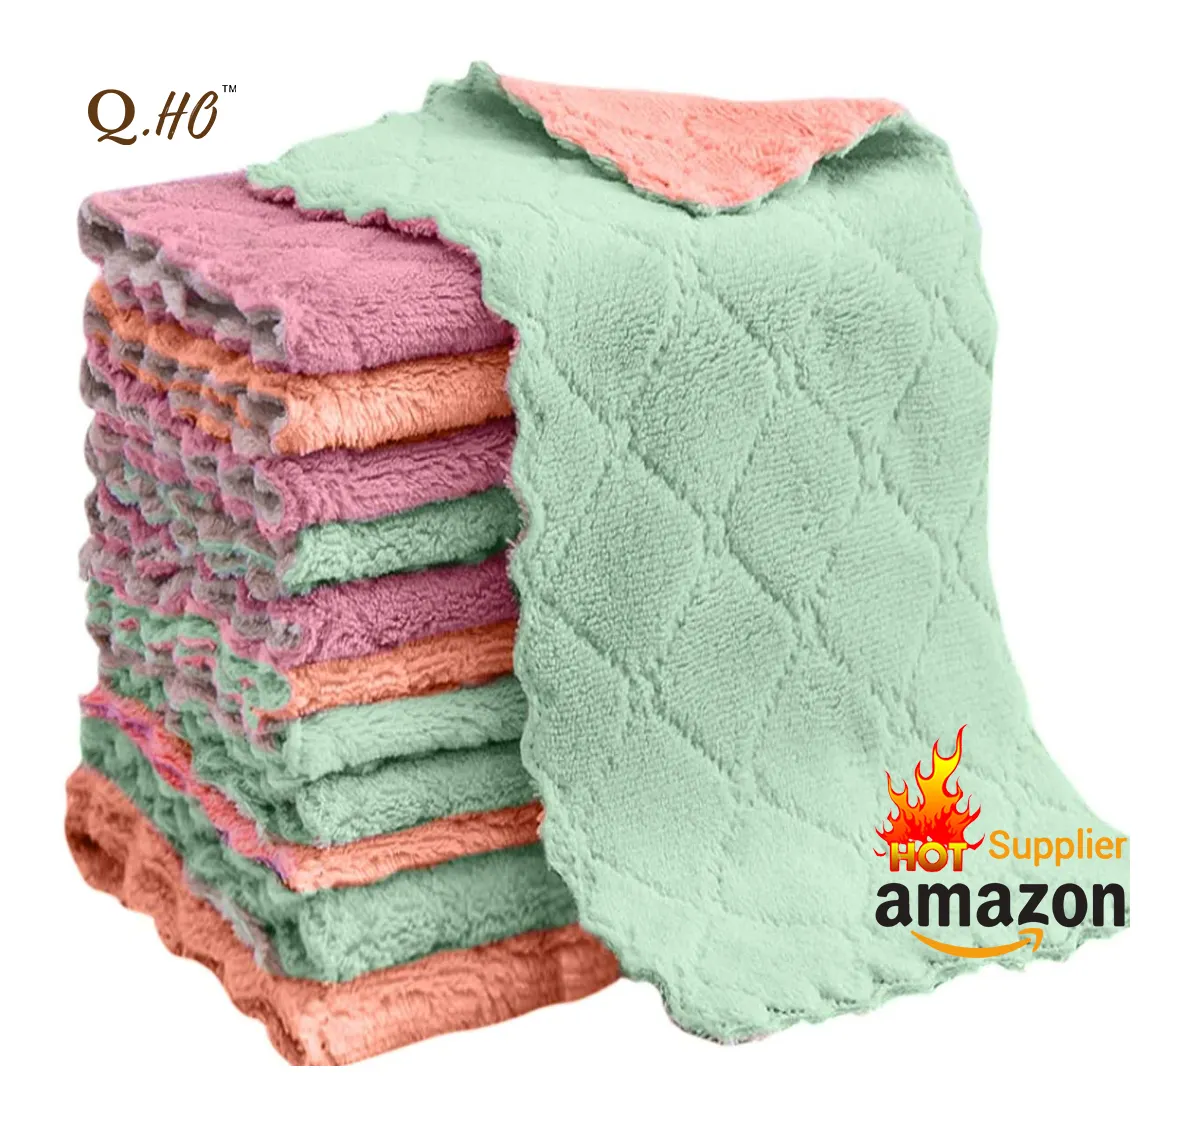 Restaurant Cleaning Cloths Premium Dishcloths Super Absorbent Coral Fleece Nonstick Oil Washable Fast Drying Dish Rags